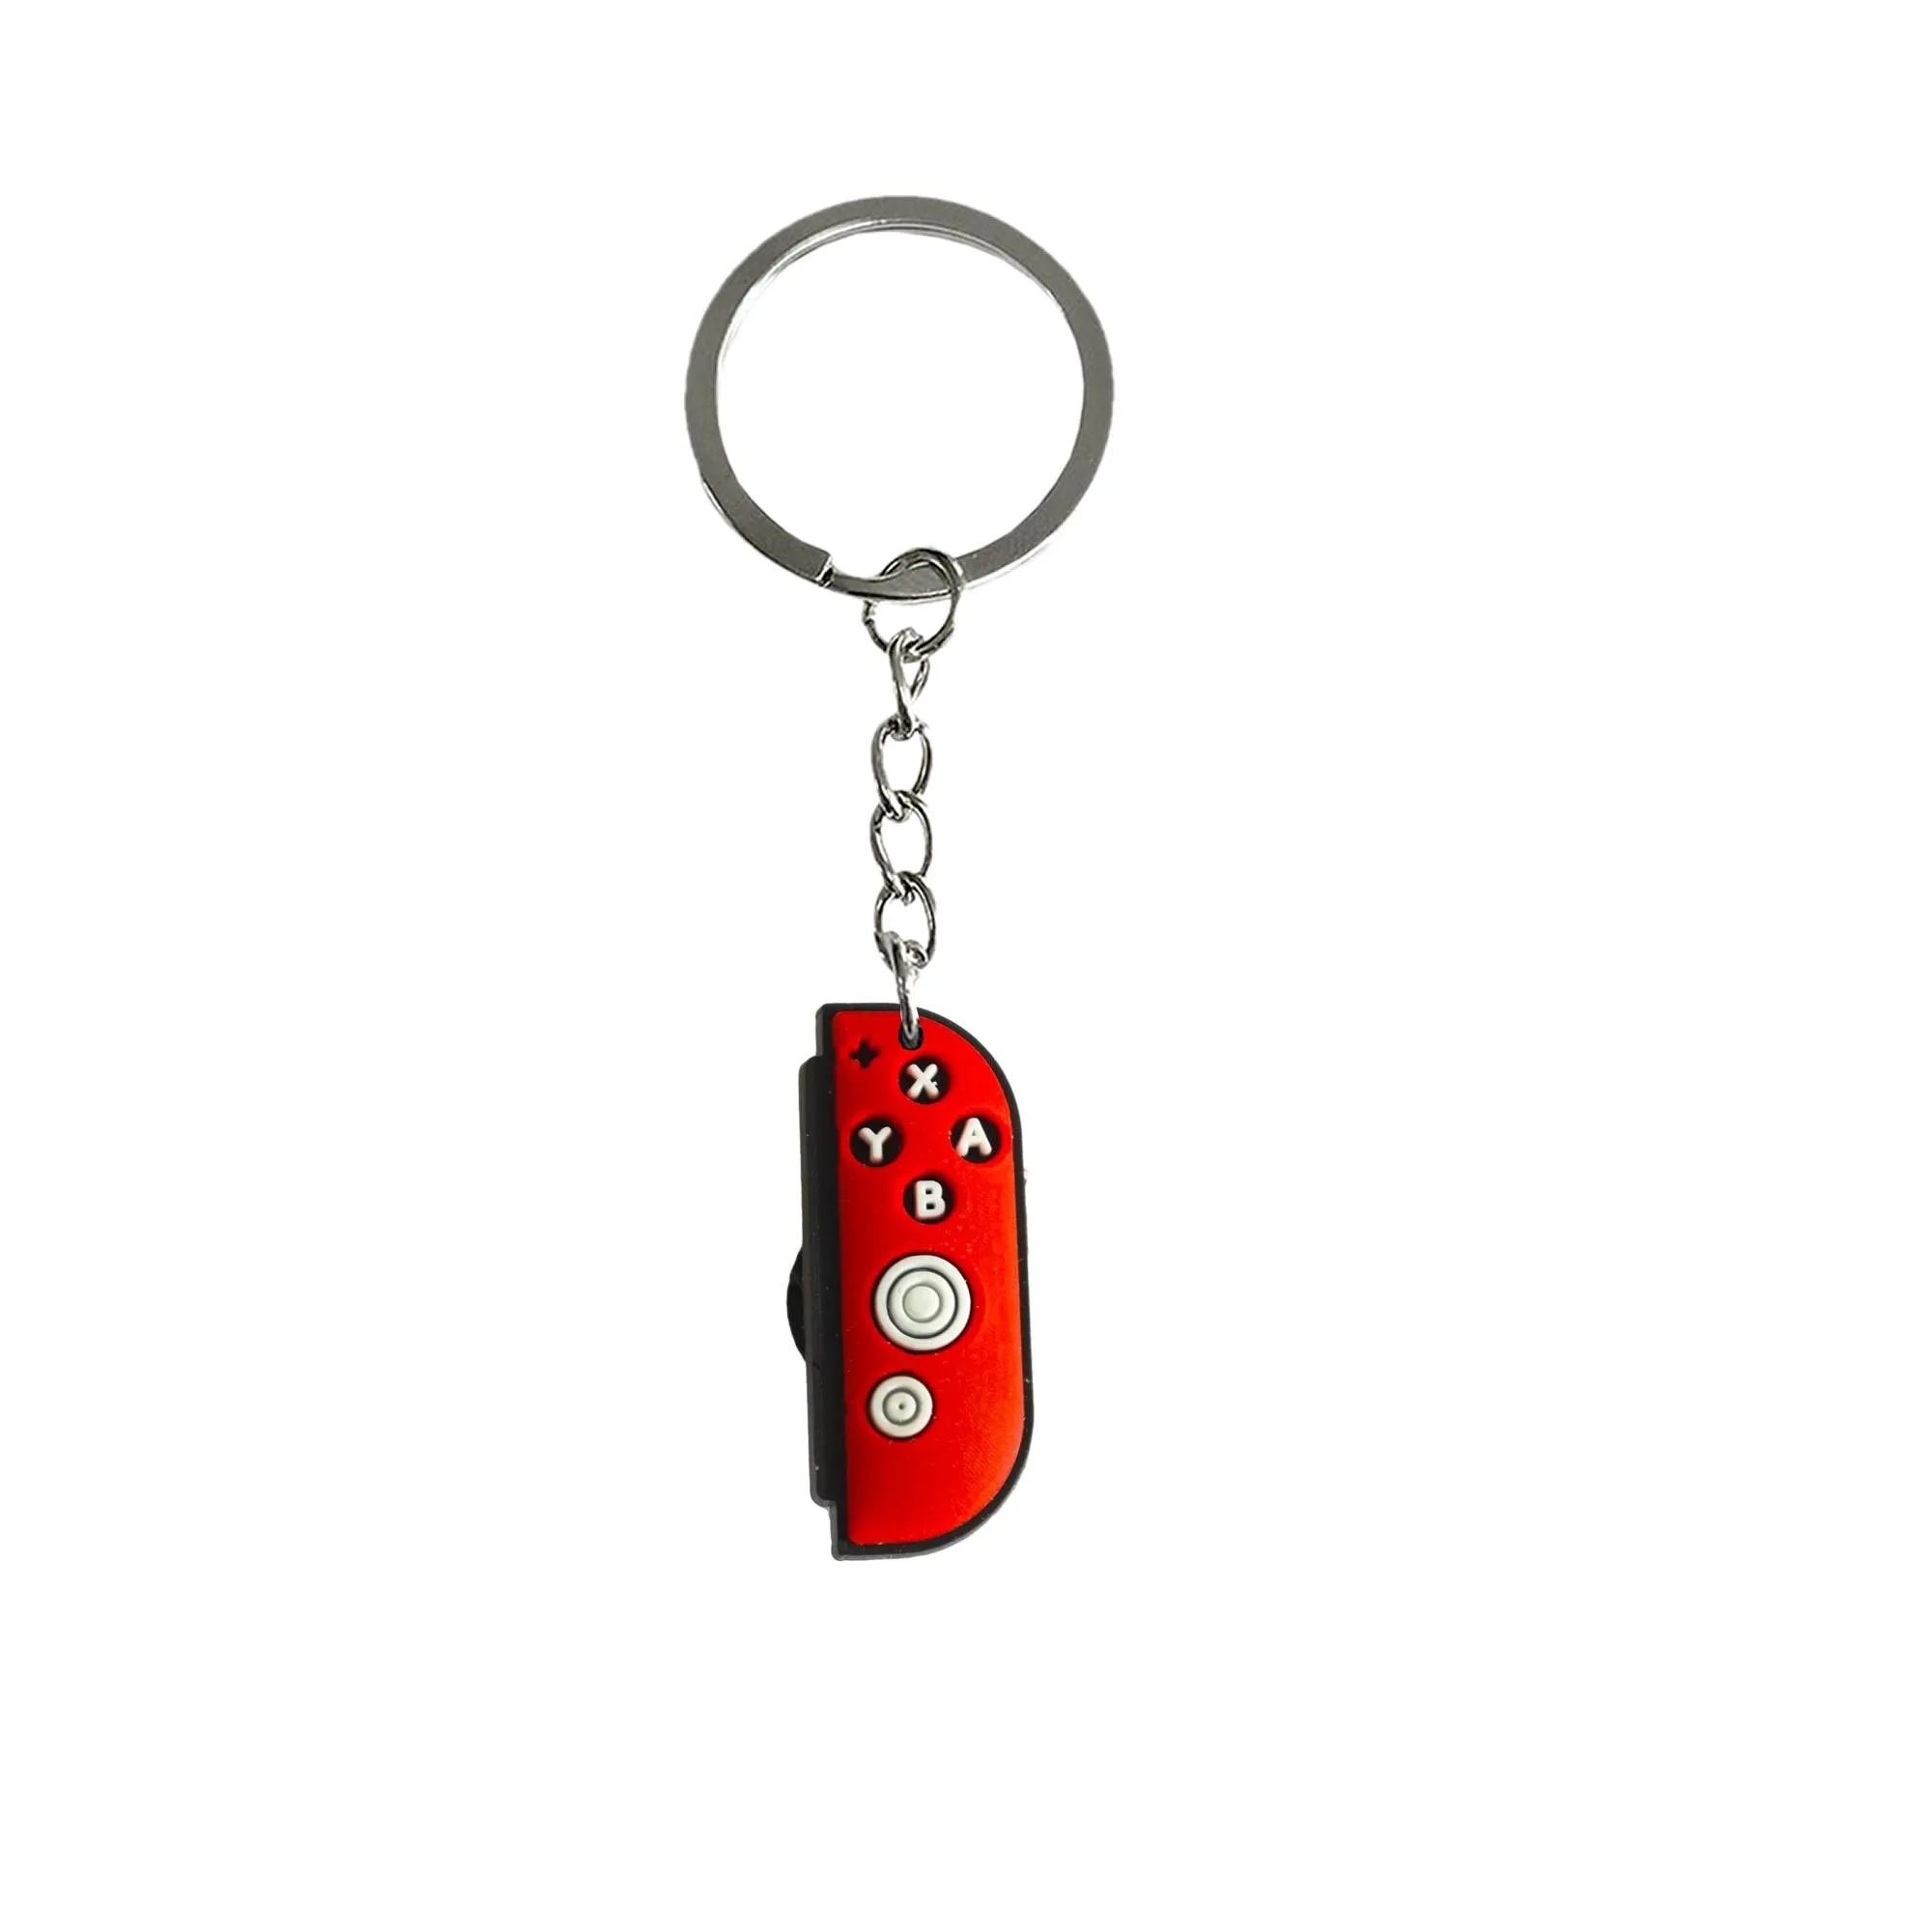 game 63 keychain for tags goodie bag stuffer christmas gifts cool colorful anime character with wristlet keychains women keyring suitable schoolbag car classroom prizes party favors